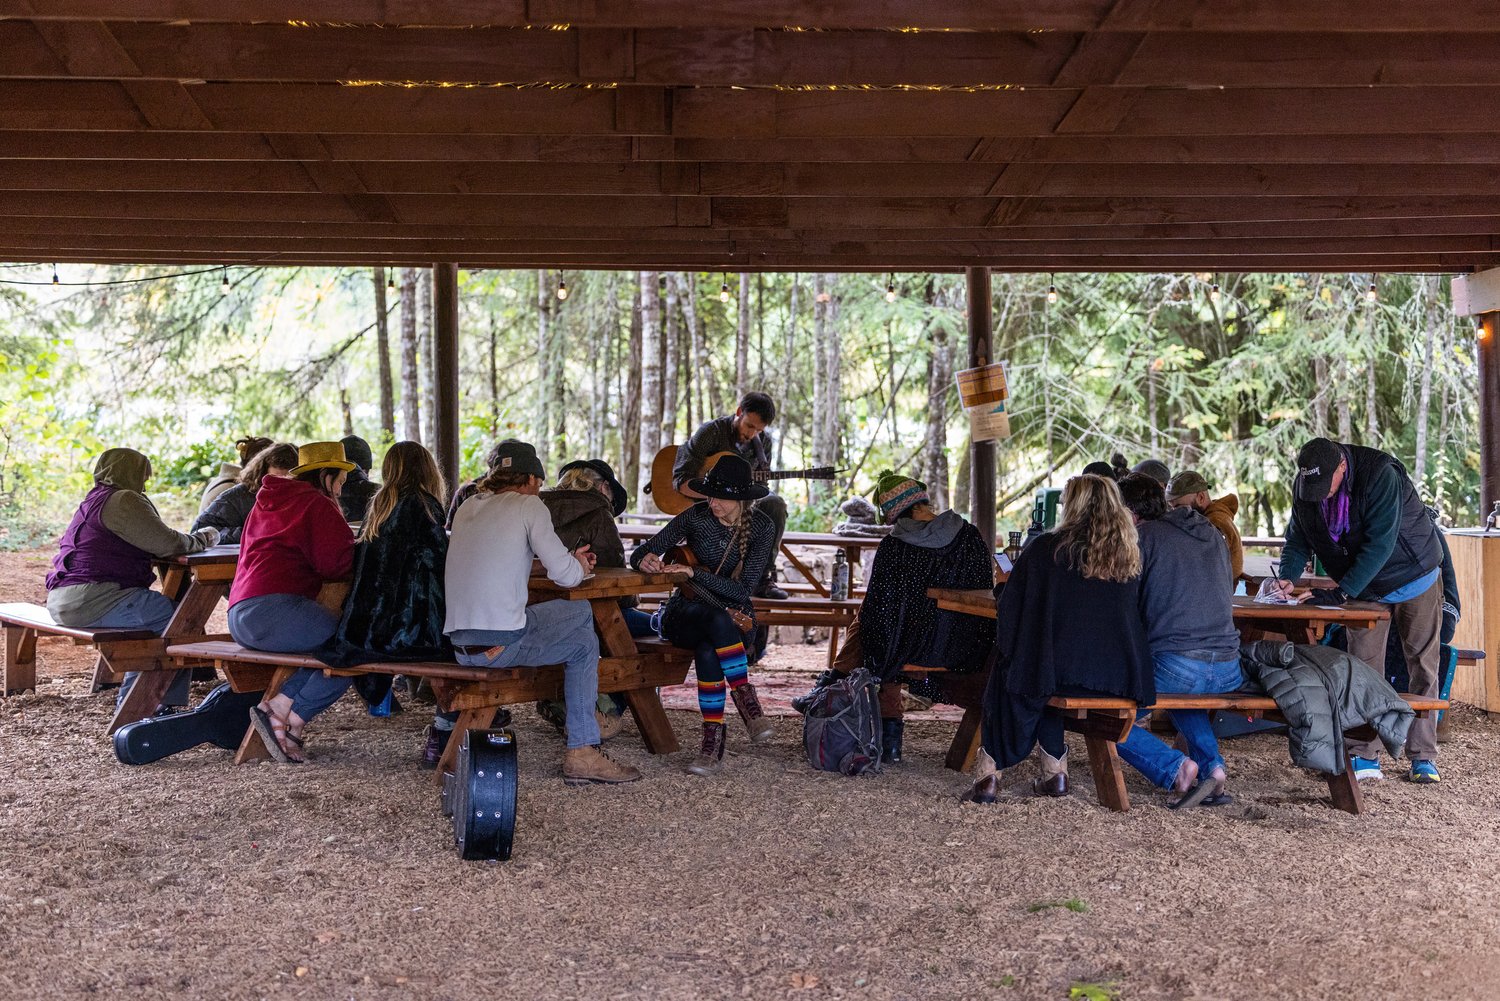 Group of songwriters at picnic benches in the woods